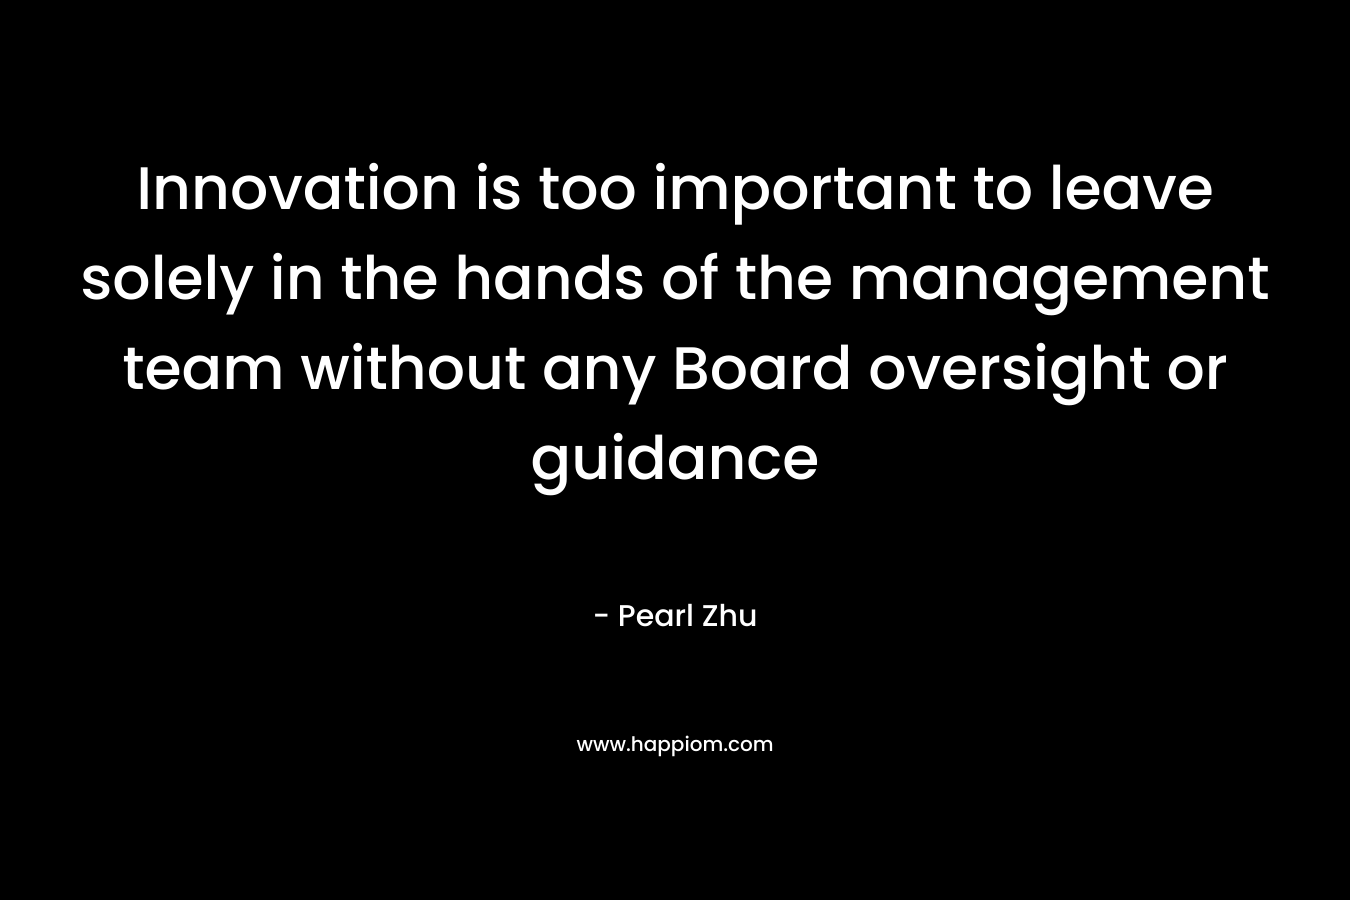 Innovation is too important to leave solely in the hands of the management team without any Board oversight or guidance – Pearl Zhu